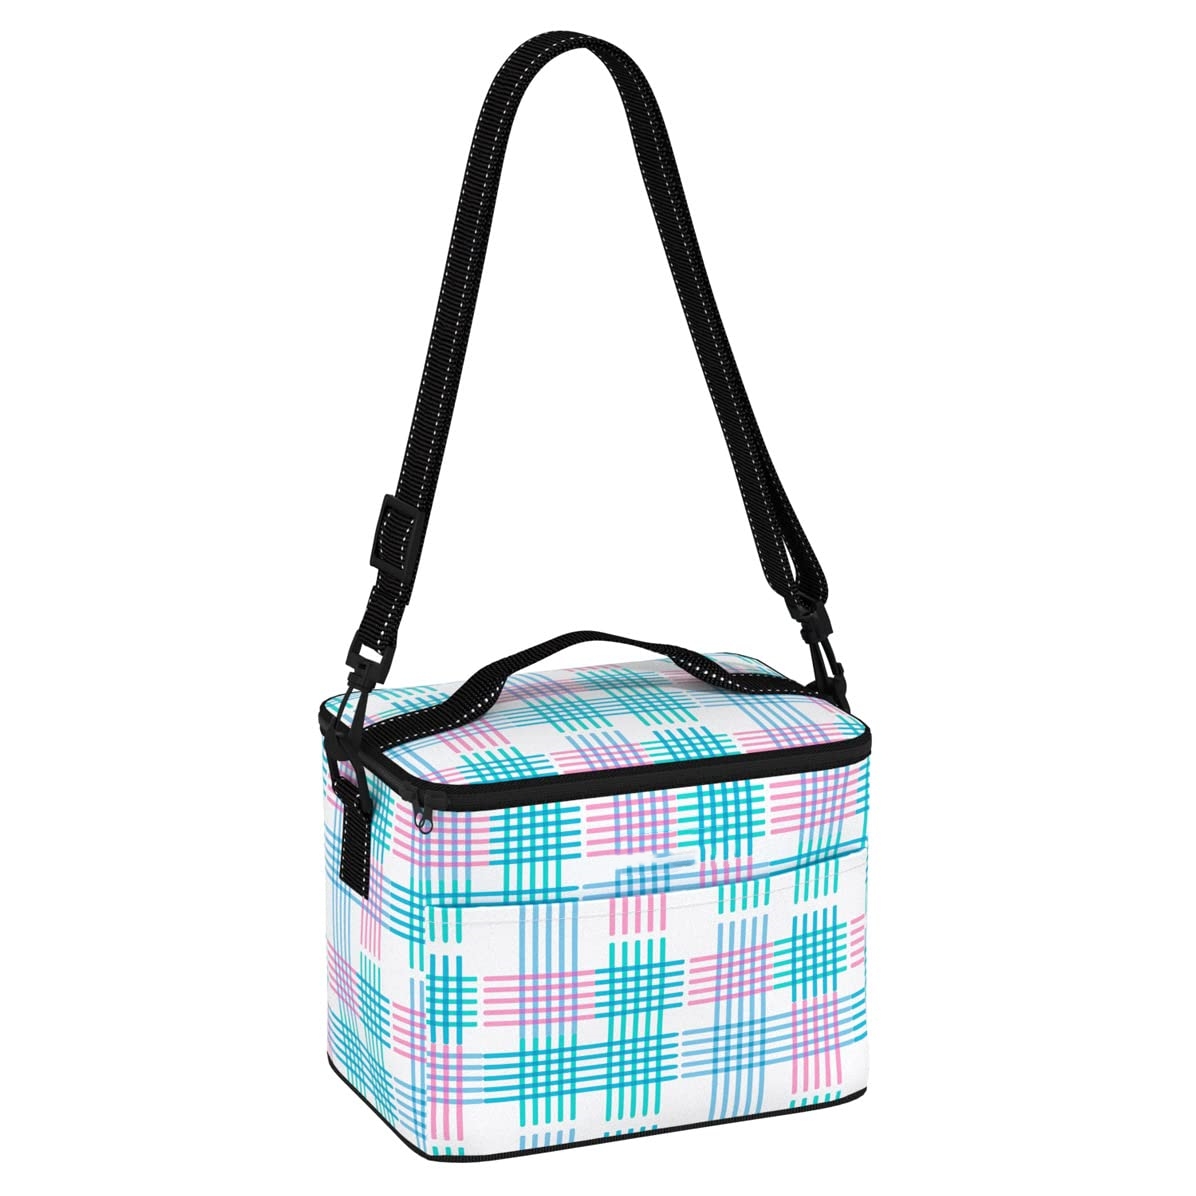 Soft Insulated Cooler for Beach Travel Picnic Cooler